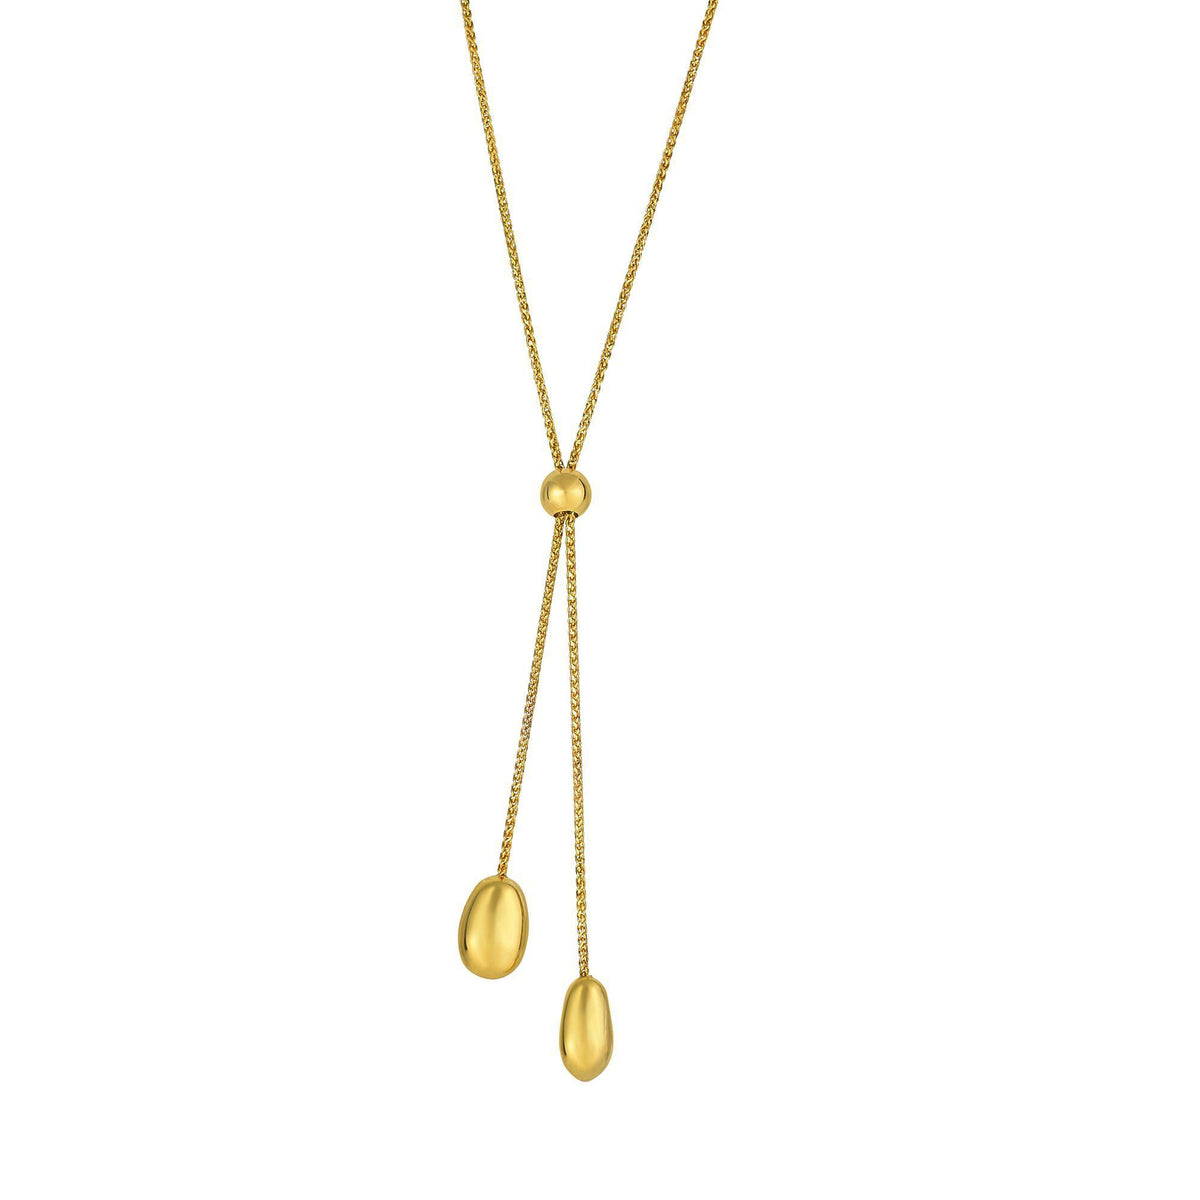 14k Yellow Gold Lariet Style Necklace, 24" fine designer jewelry for men and women